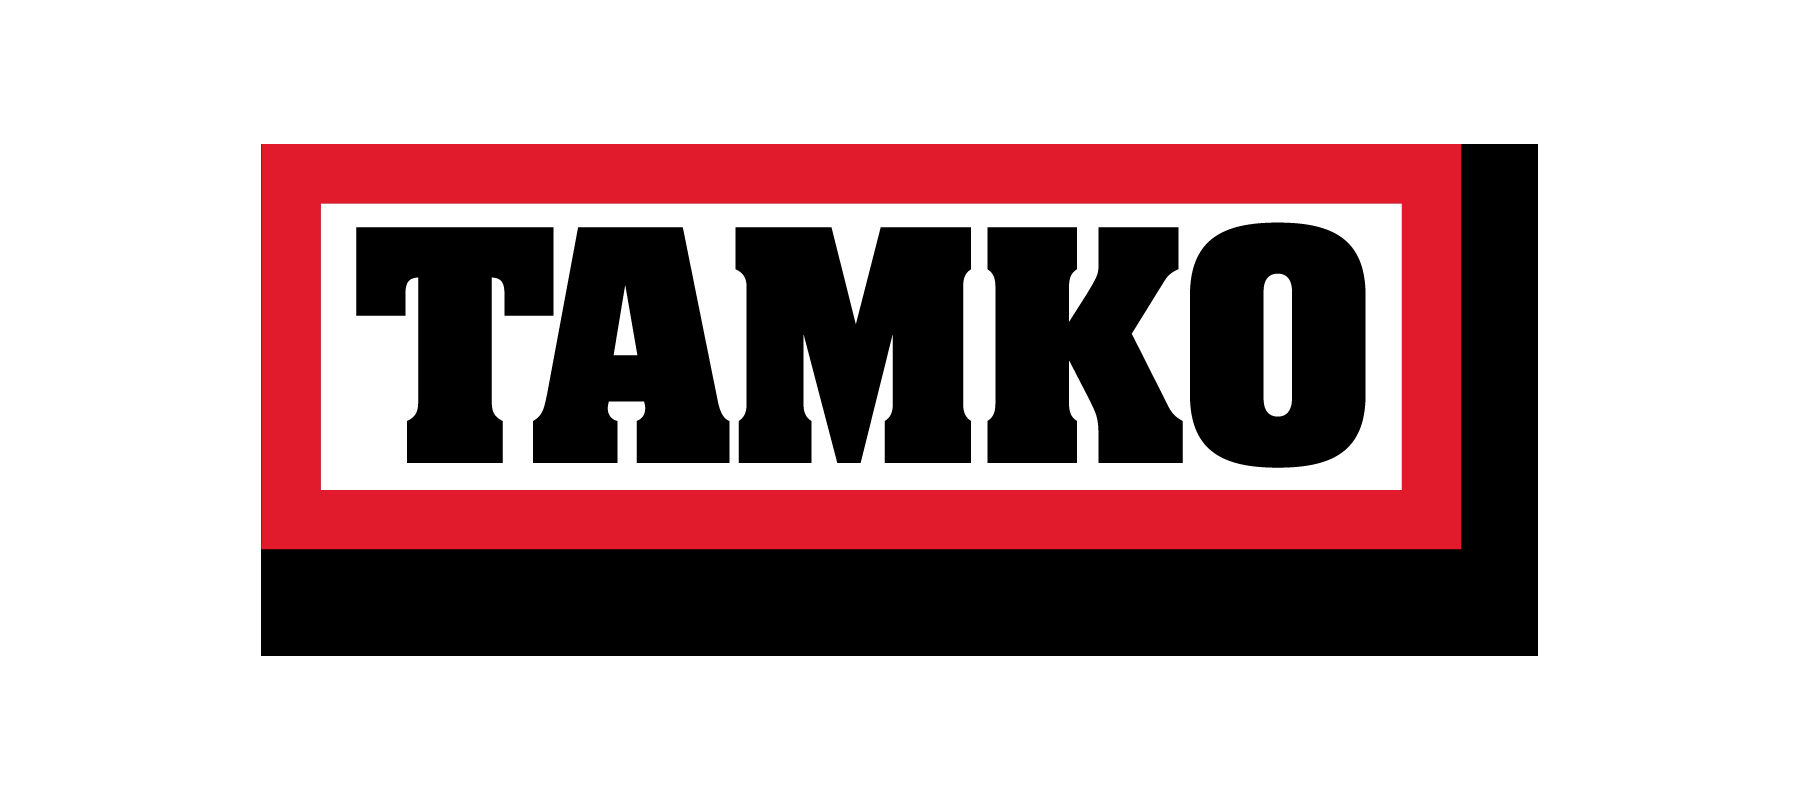 TAMKO Building Supplies Roofing Logo